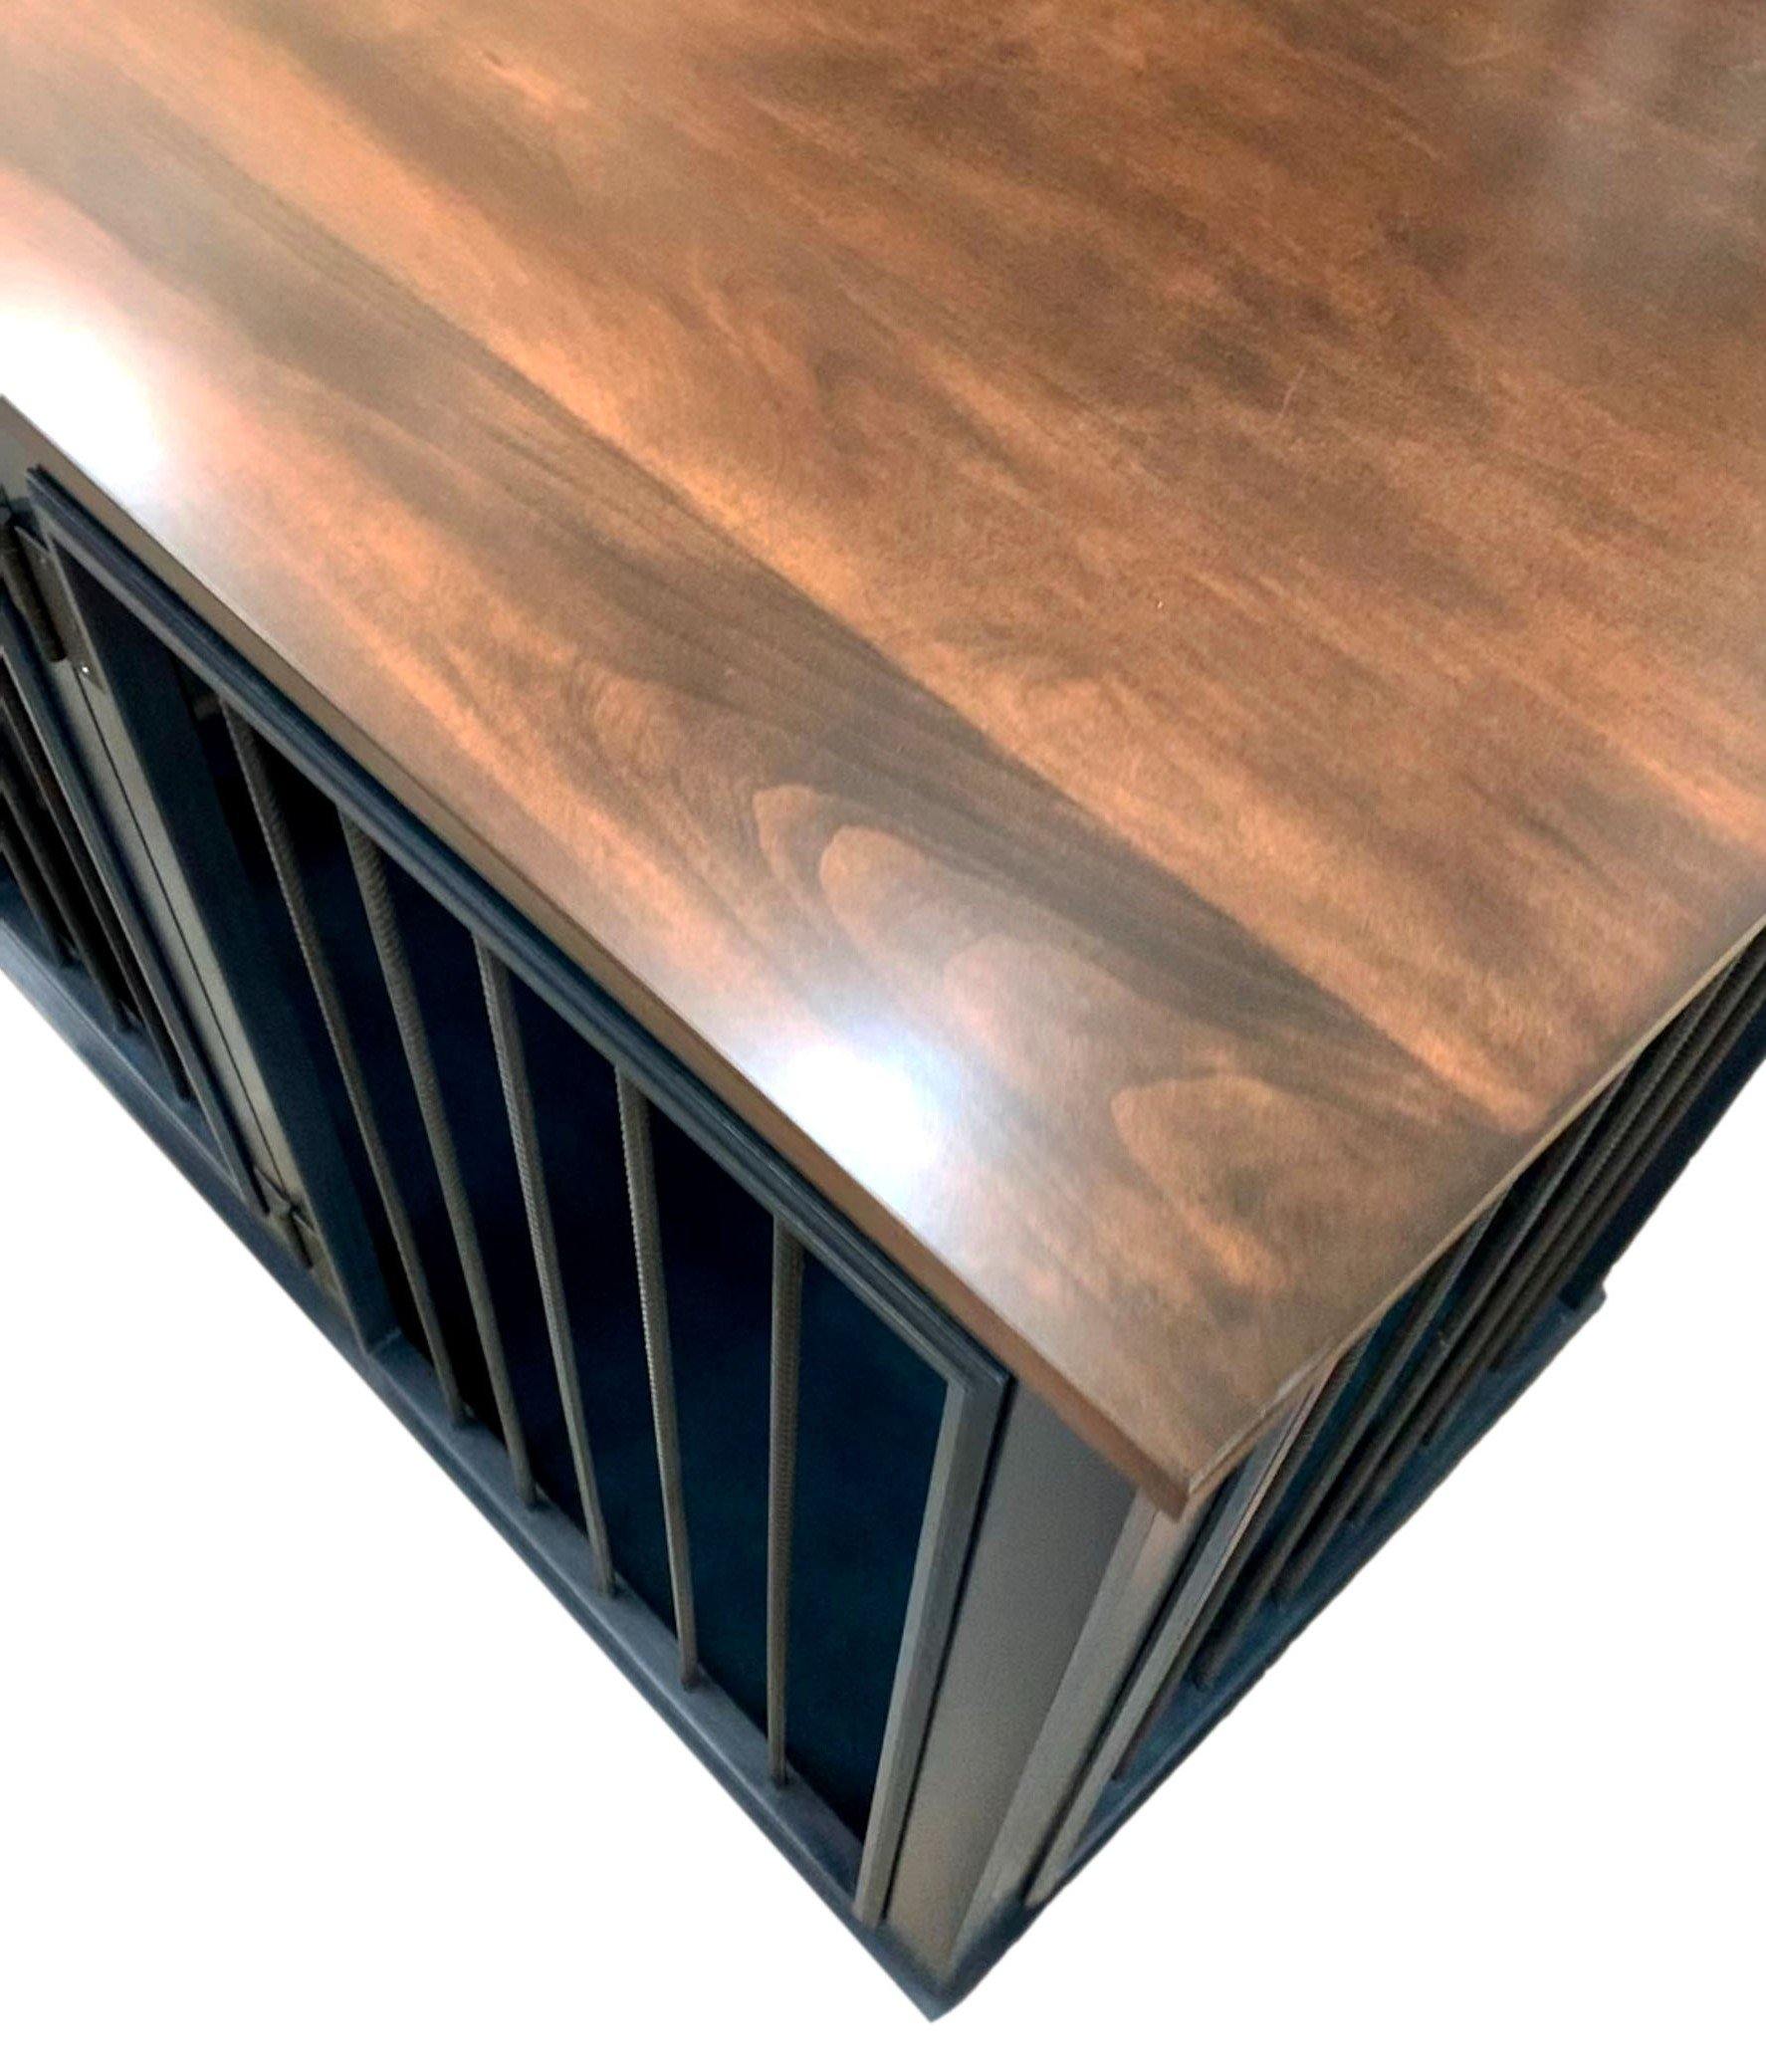 Solid Maple Handcrafted Wide Plank Tabletop from Dogwood Designs & Atelier - Carolina Dog Crate Co.